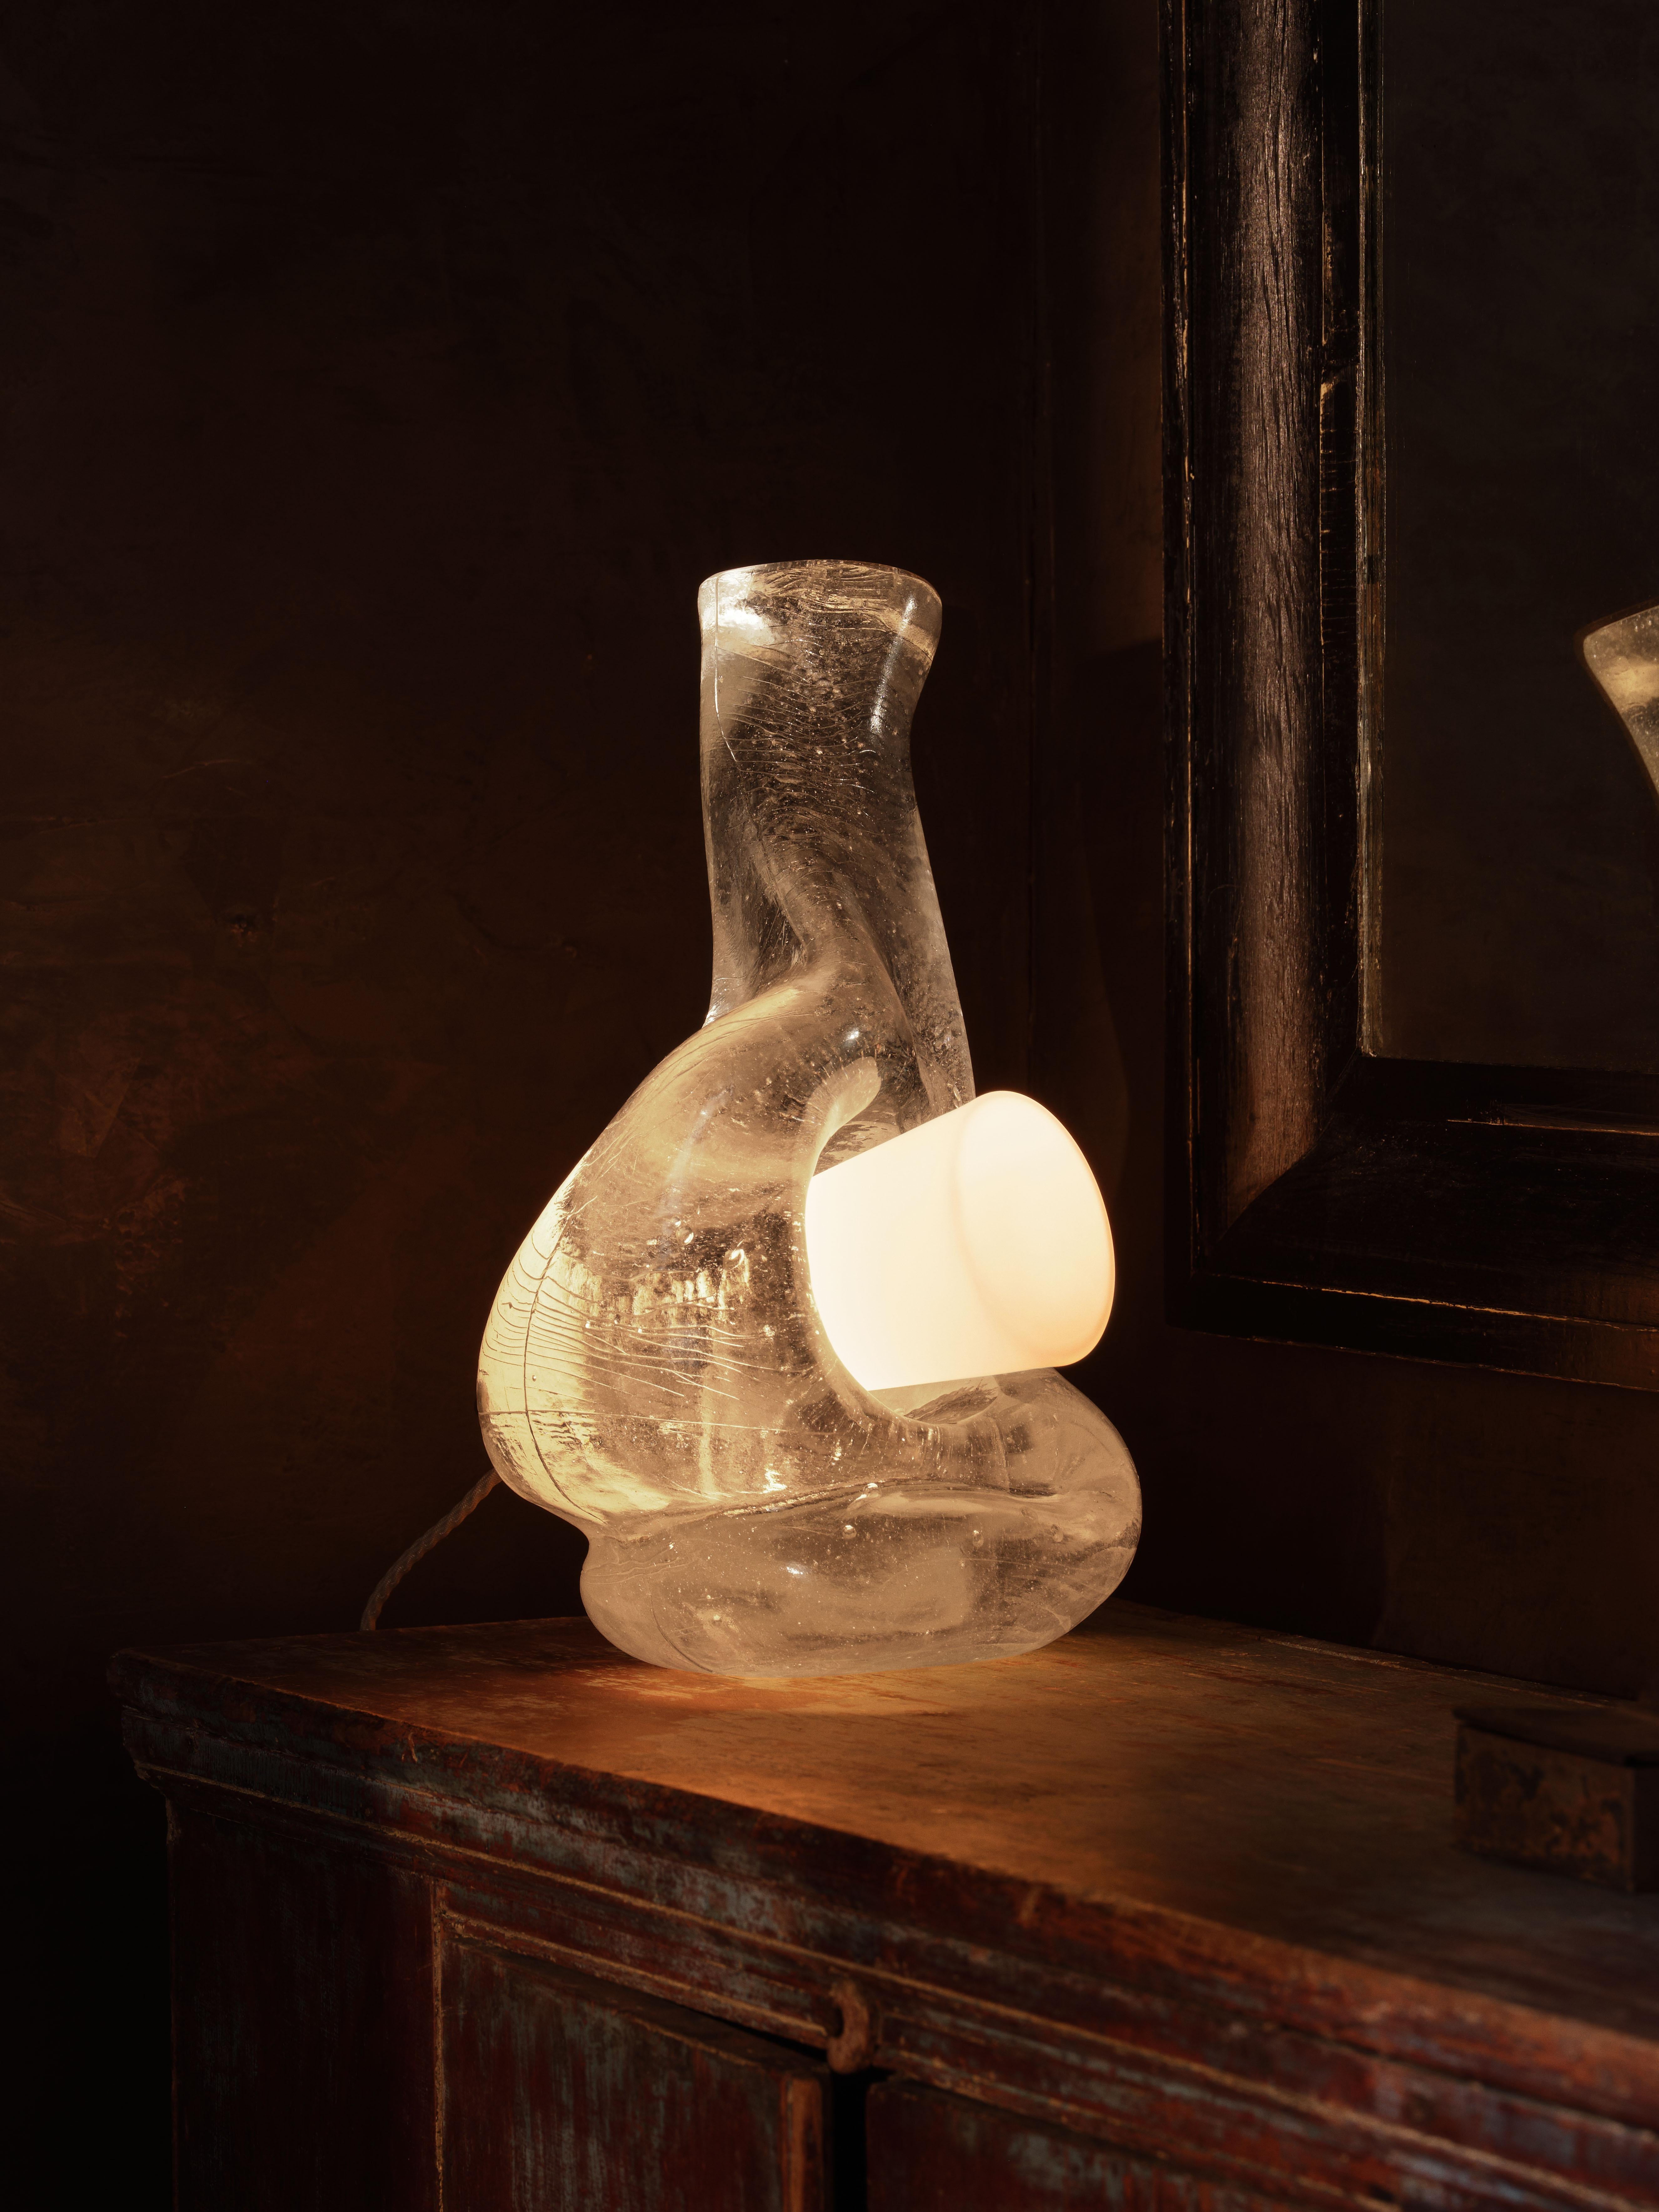 Crystal clear molten glass is poured into a graphite mold to create the sculptural body of the the lamp, which is pierced by a hand-blown white glass cone and mounted to a bronze armature.

Materials: Cast Glass, Handblown White Frosted Glass and